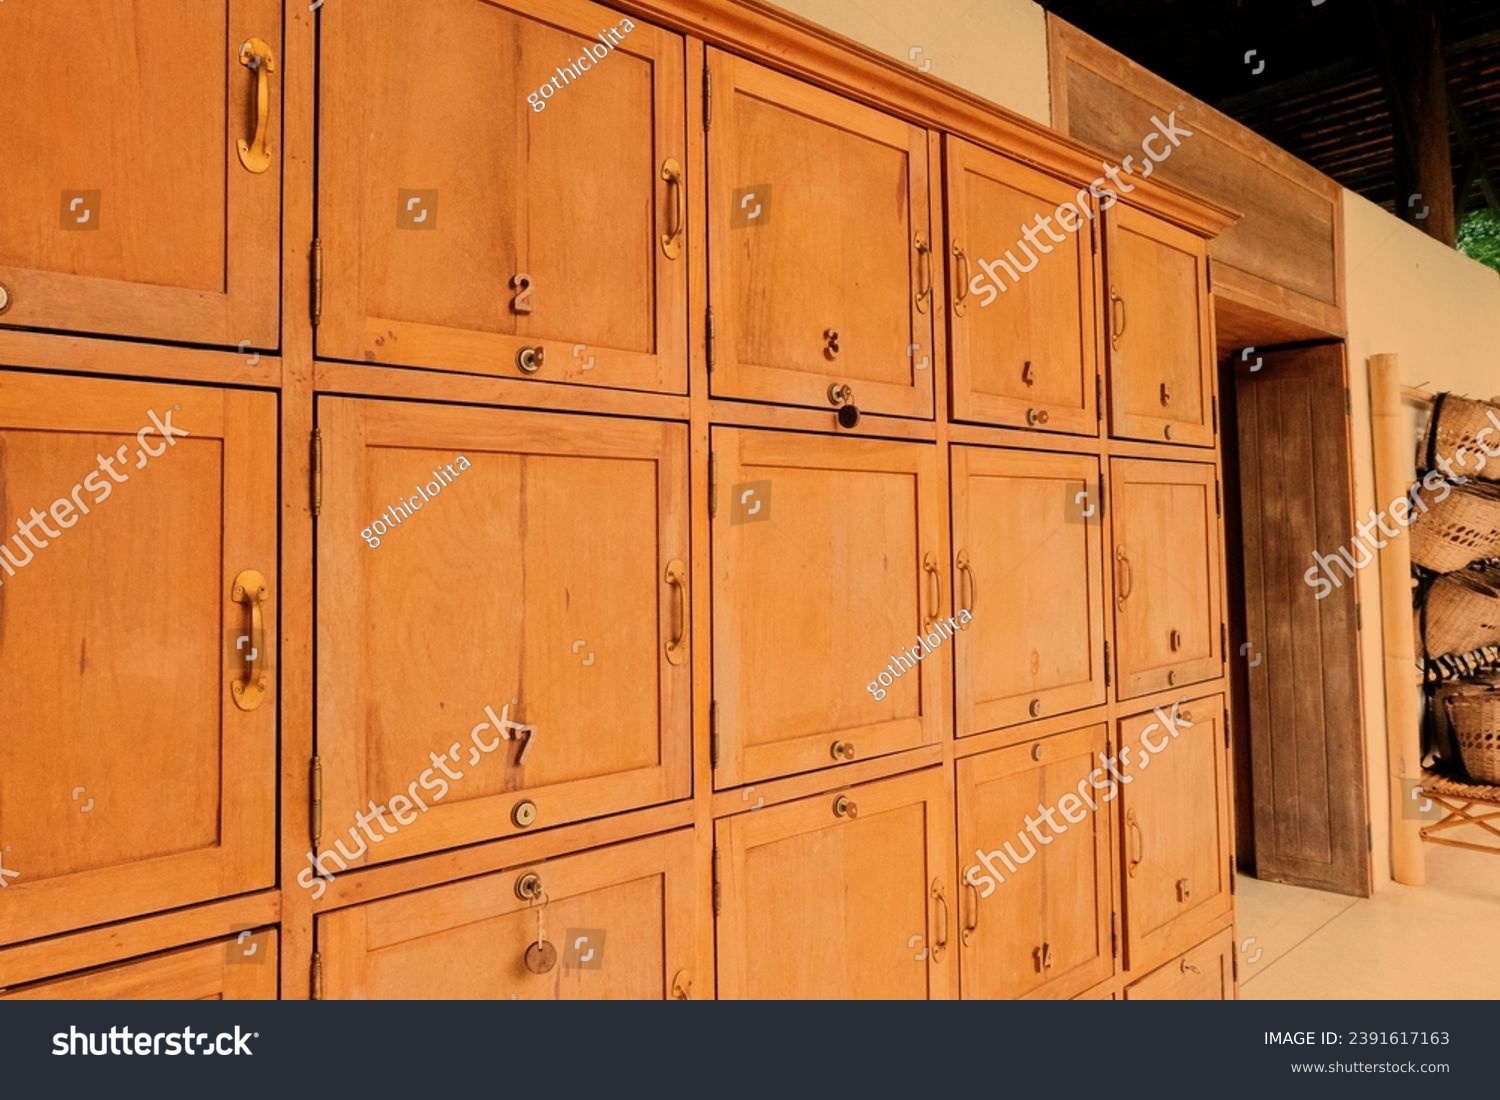 Wooden lockers in a locker room in the modern building, Locker room interior in modern fitness gym, free text space and empty room. #2391617163